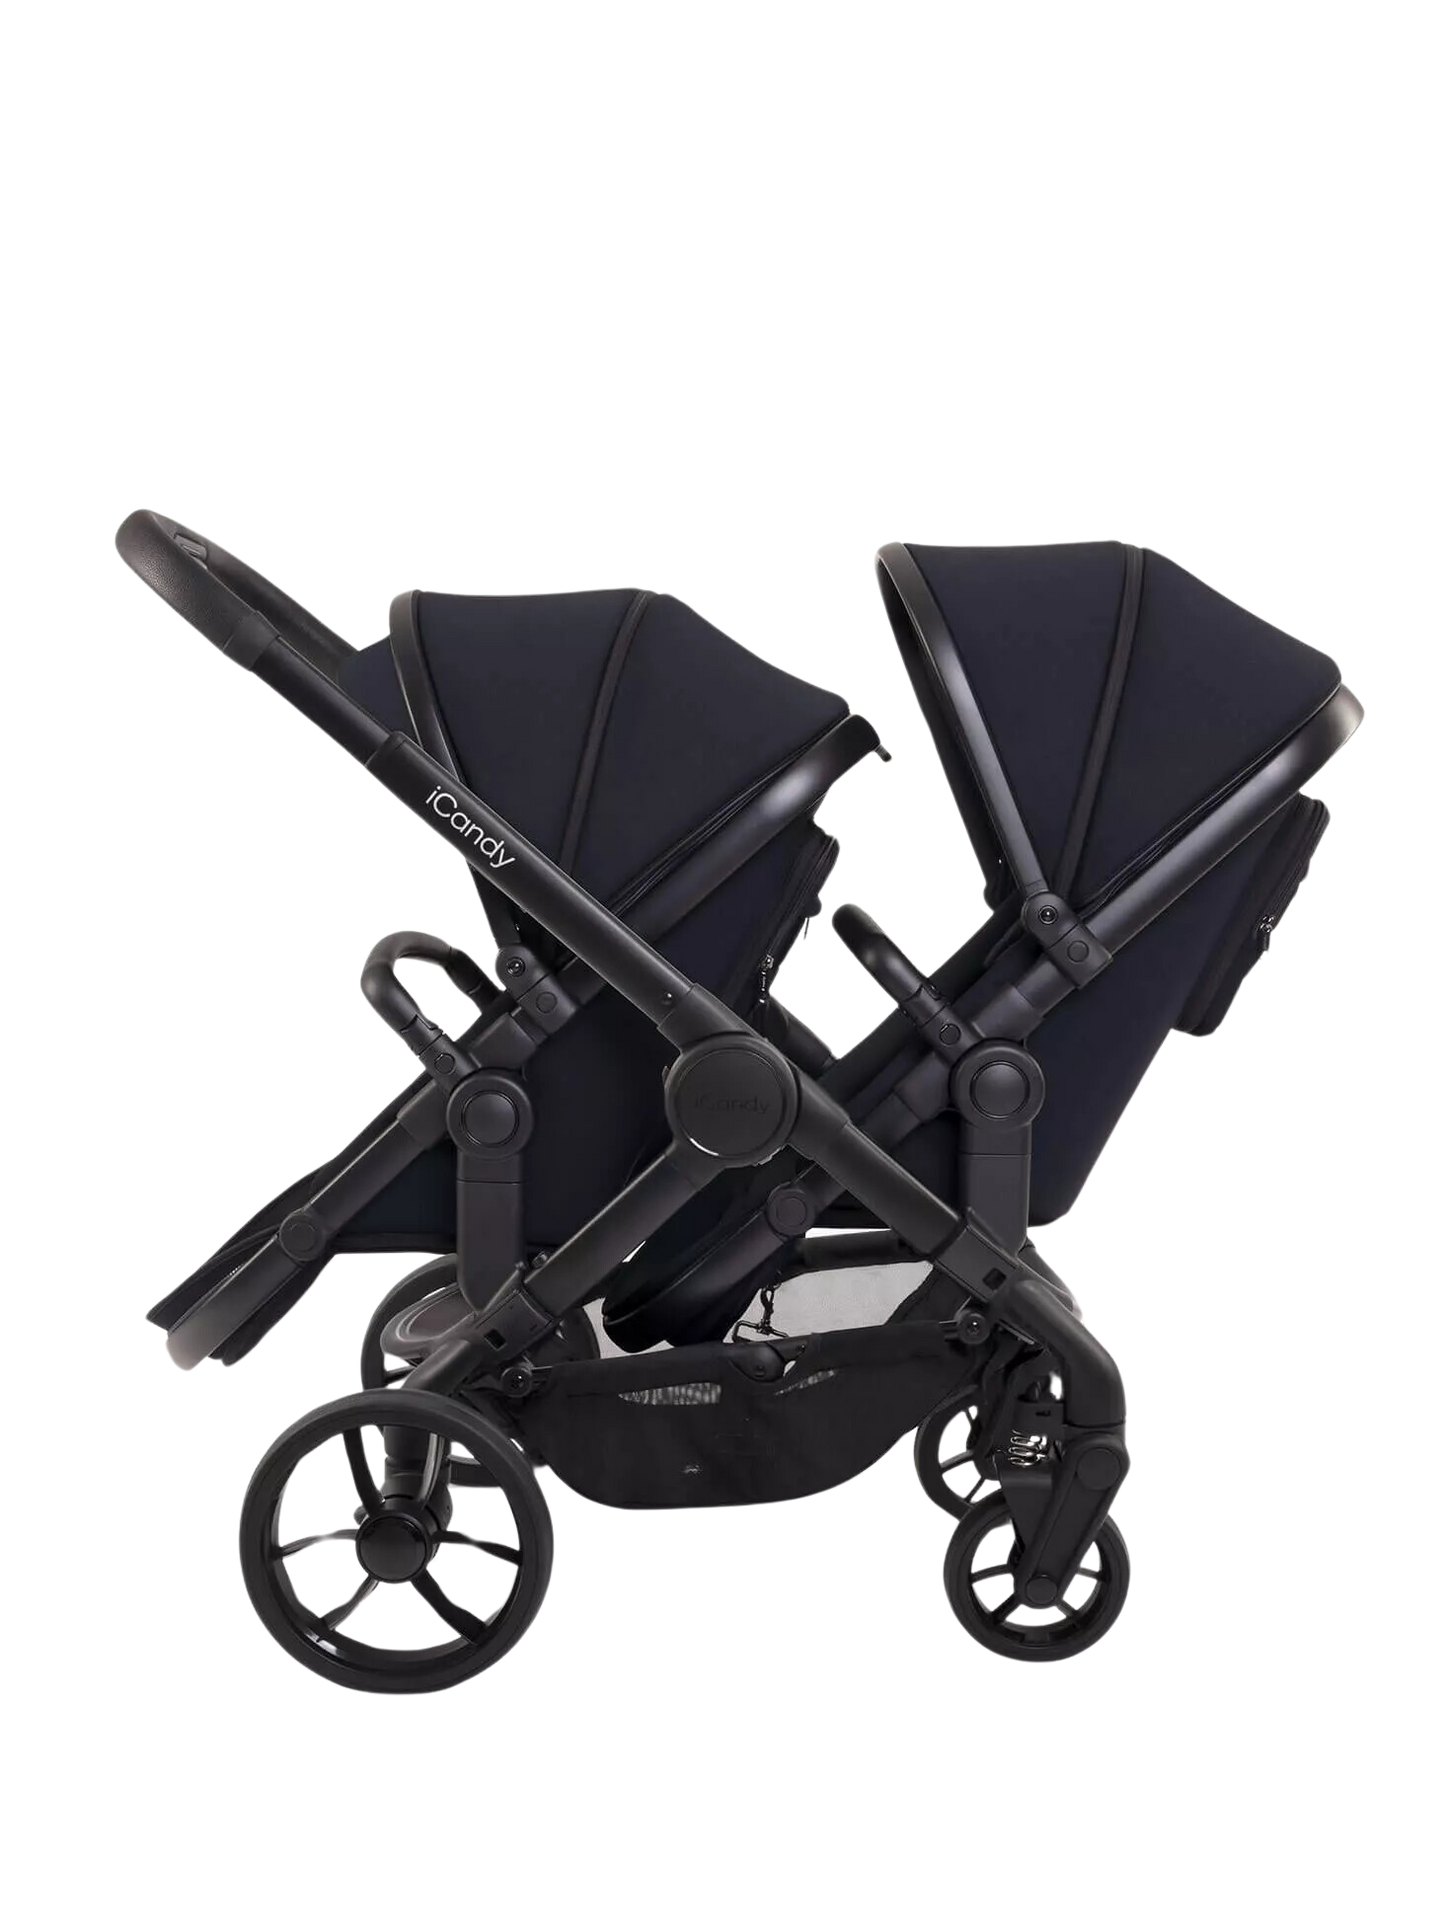 iCandy Peach 7 Double Stroller and Bassinet - Black